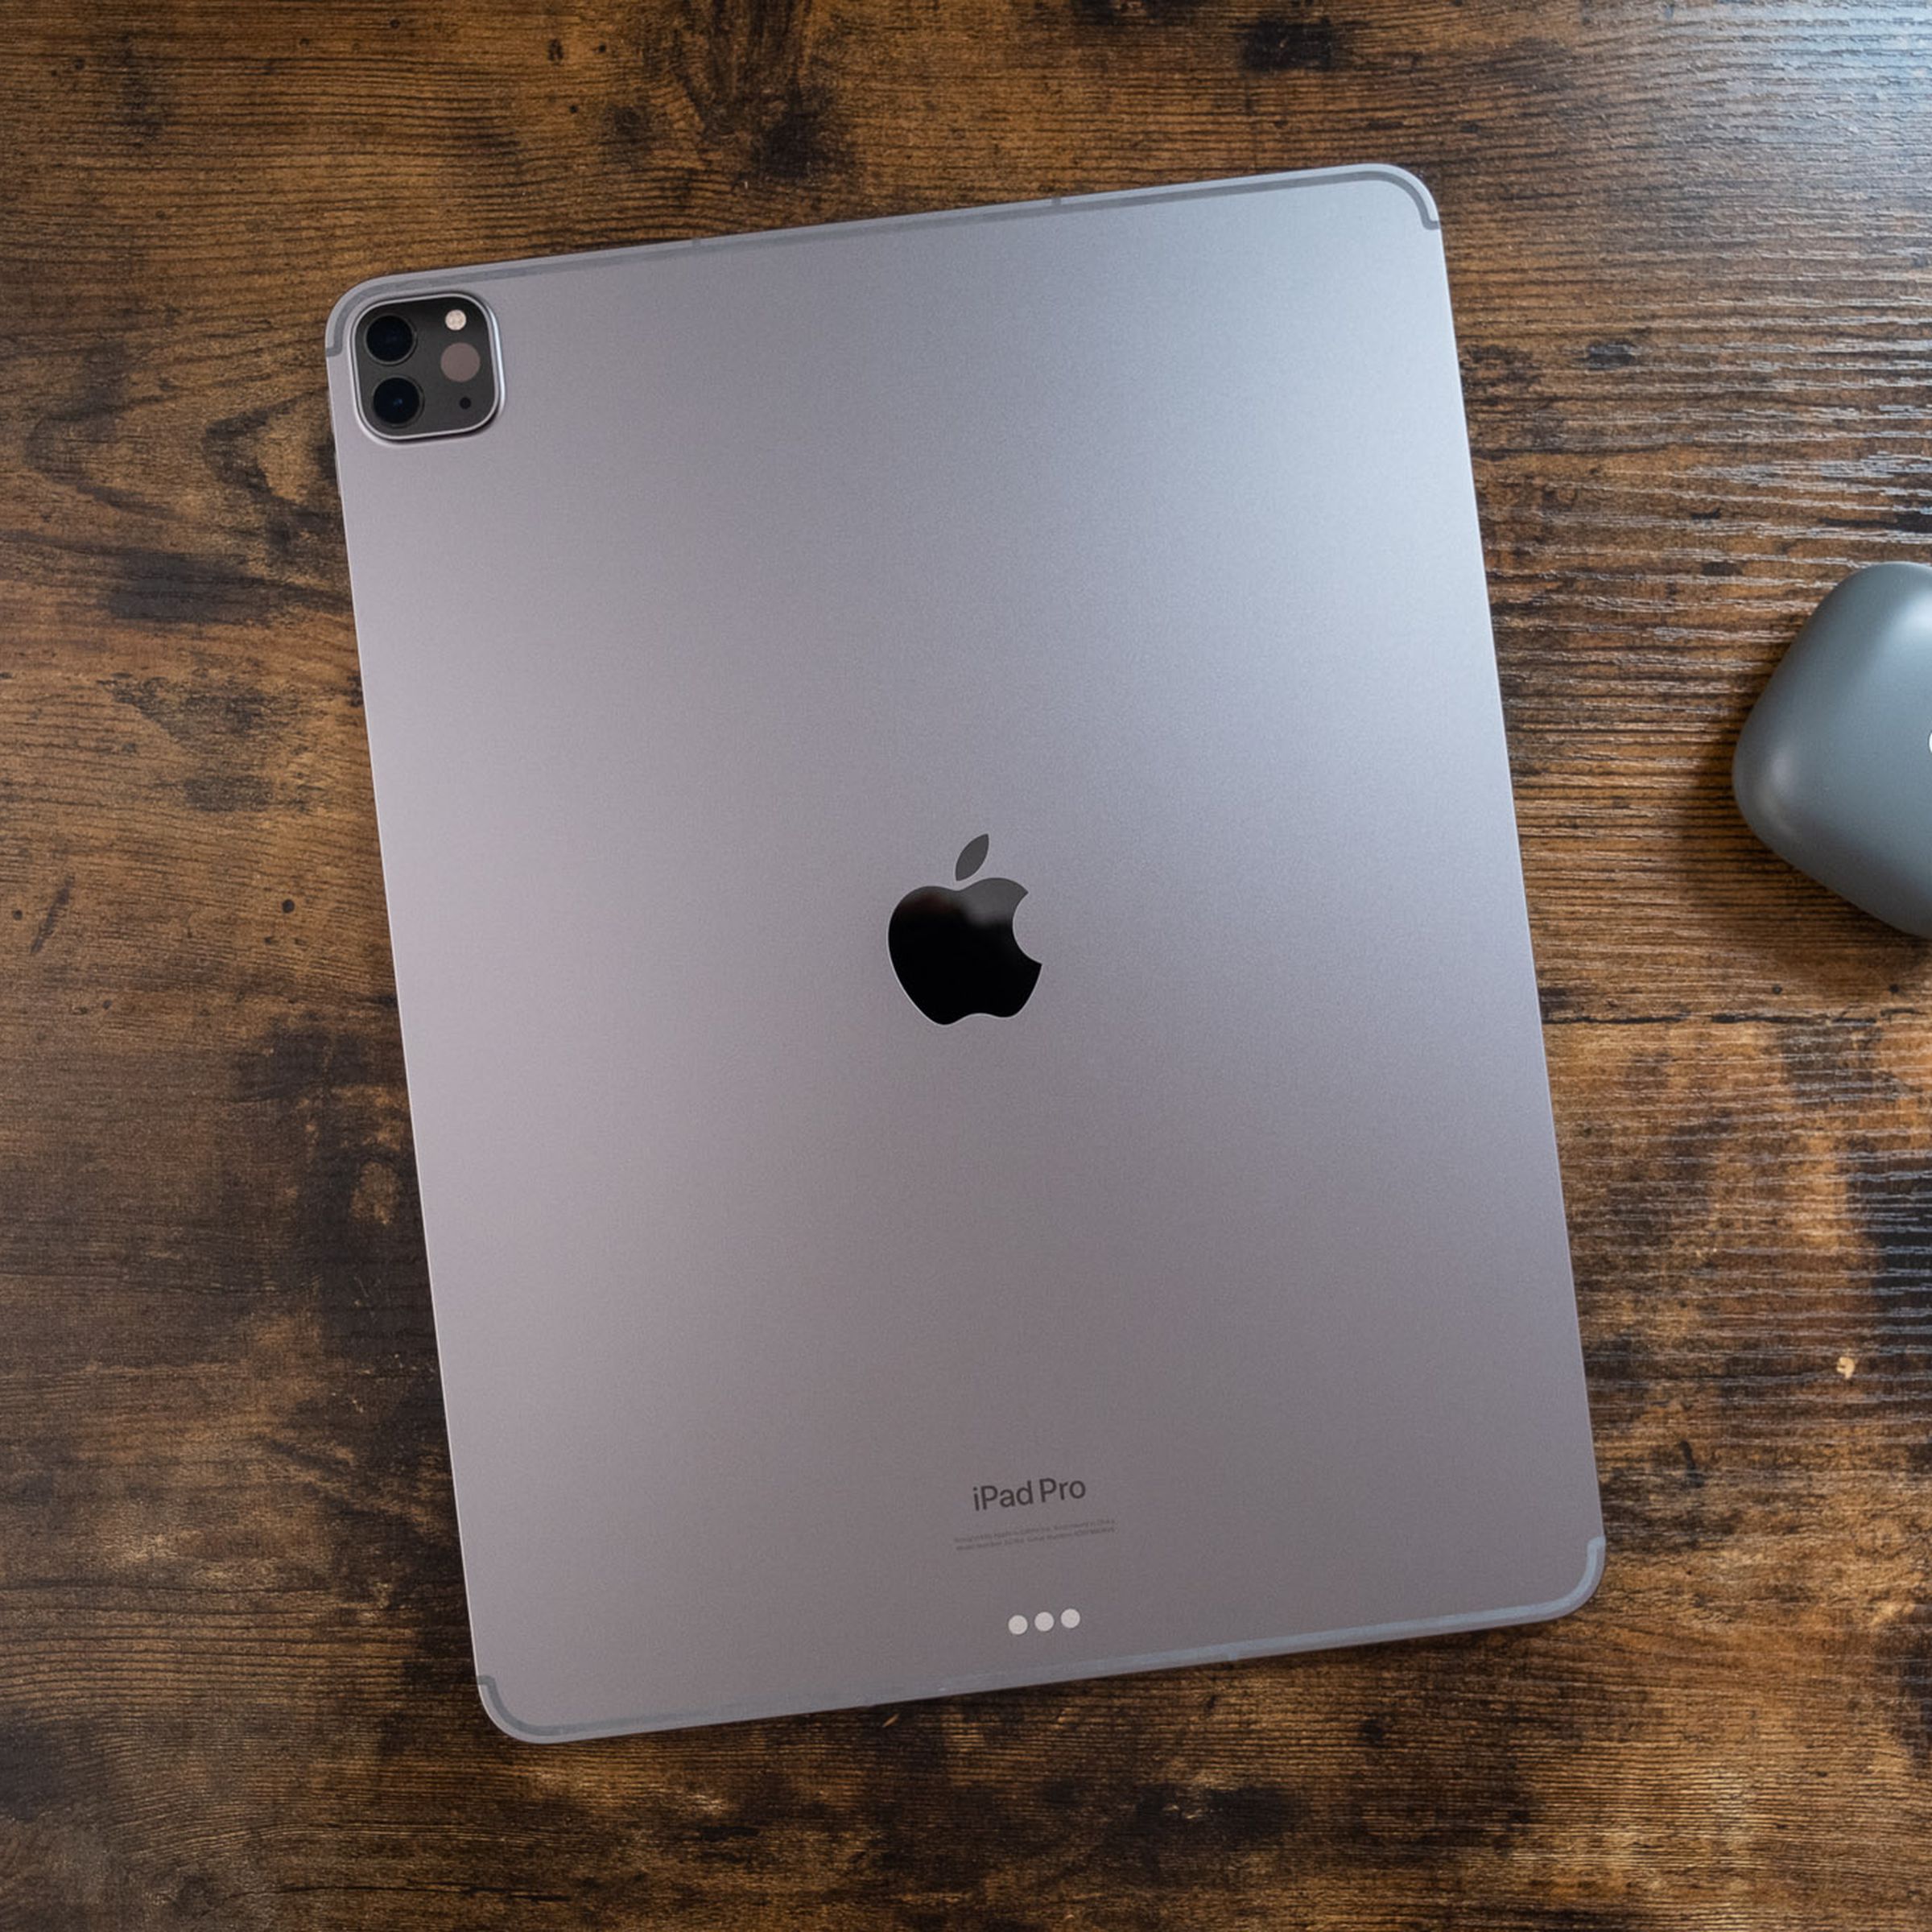 A space gray 12.9-inch iPad Pro face down on a wooden table, viewed from the top down.